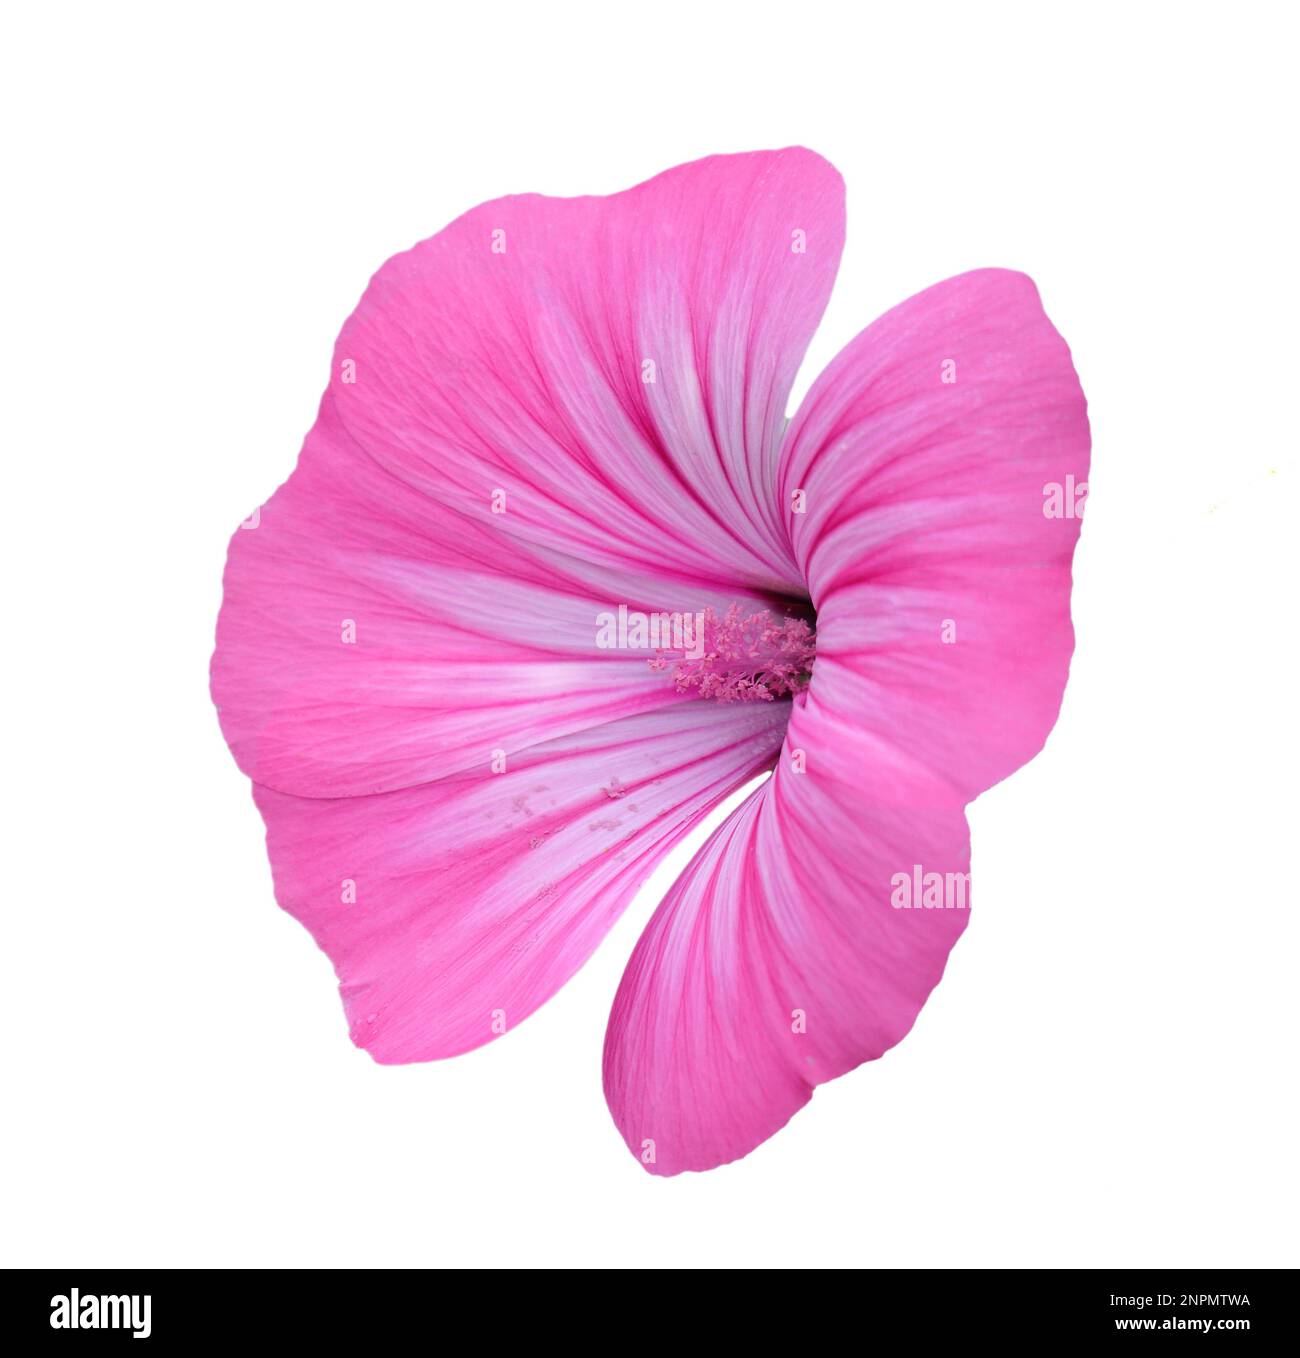 Spring, Portugal. Annual Mallows also known as Rose Mallow or Royal Mallow. Lavatera rosa in full bloom isolated on white background. Malvaceae Family Stock Photo